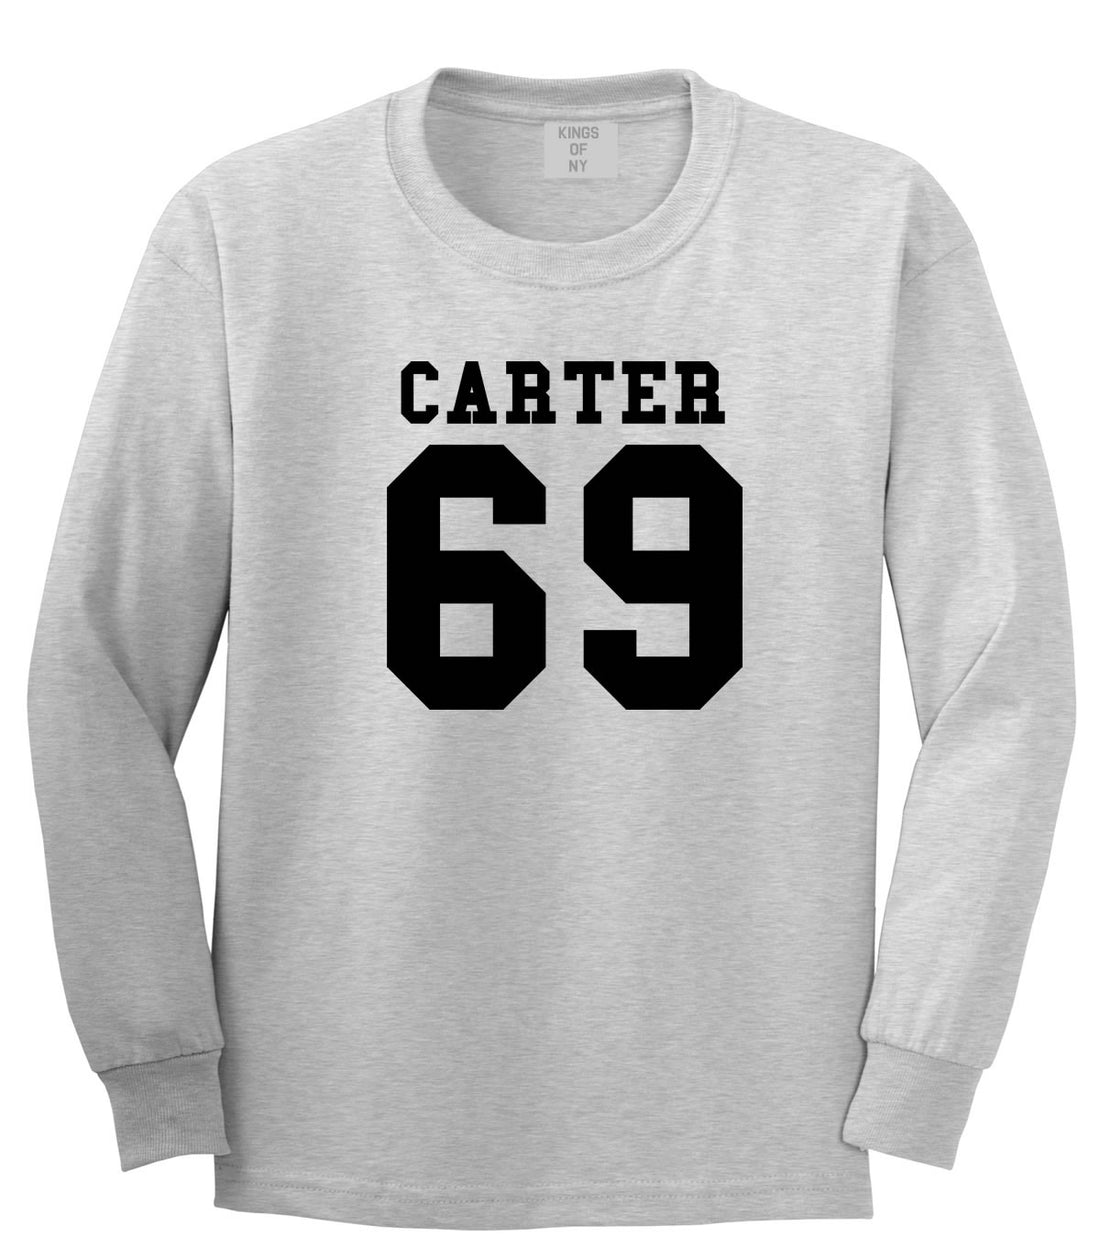  Carter 69 Team Long Sleeve T-Shirt in Grey by Kings Of NY